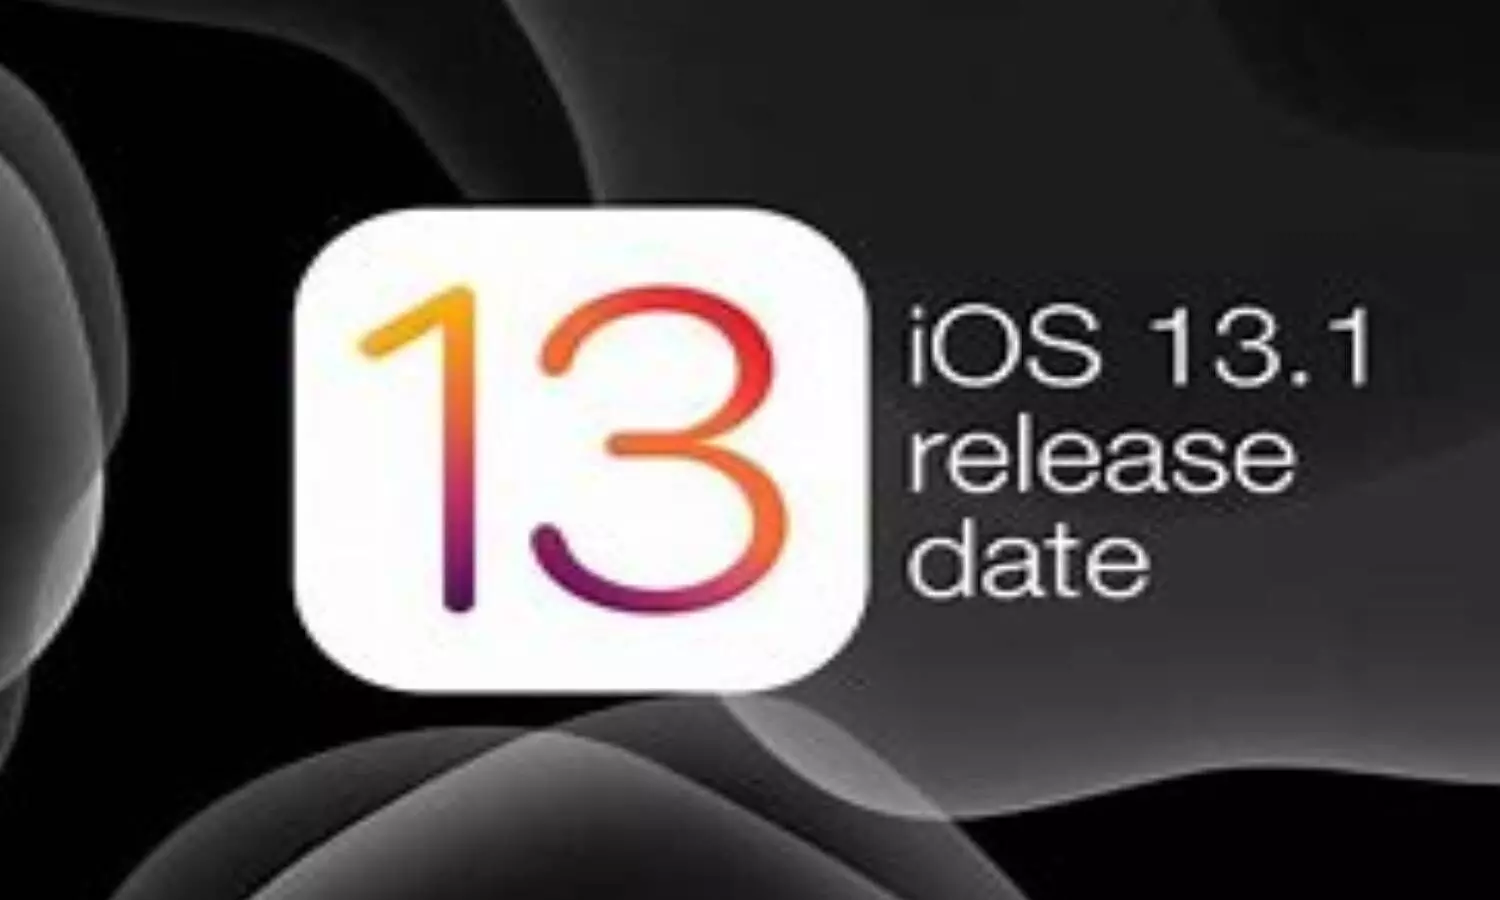 iPhone 13 launch date: California Streaming Apple Event confirmed for September 14